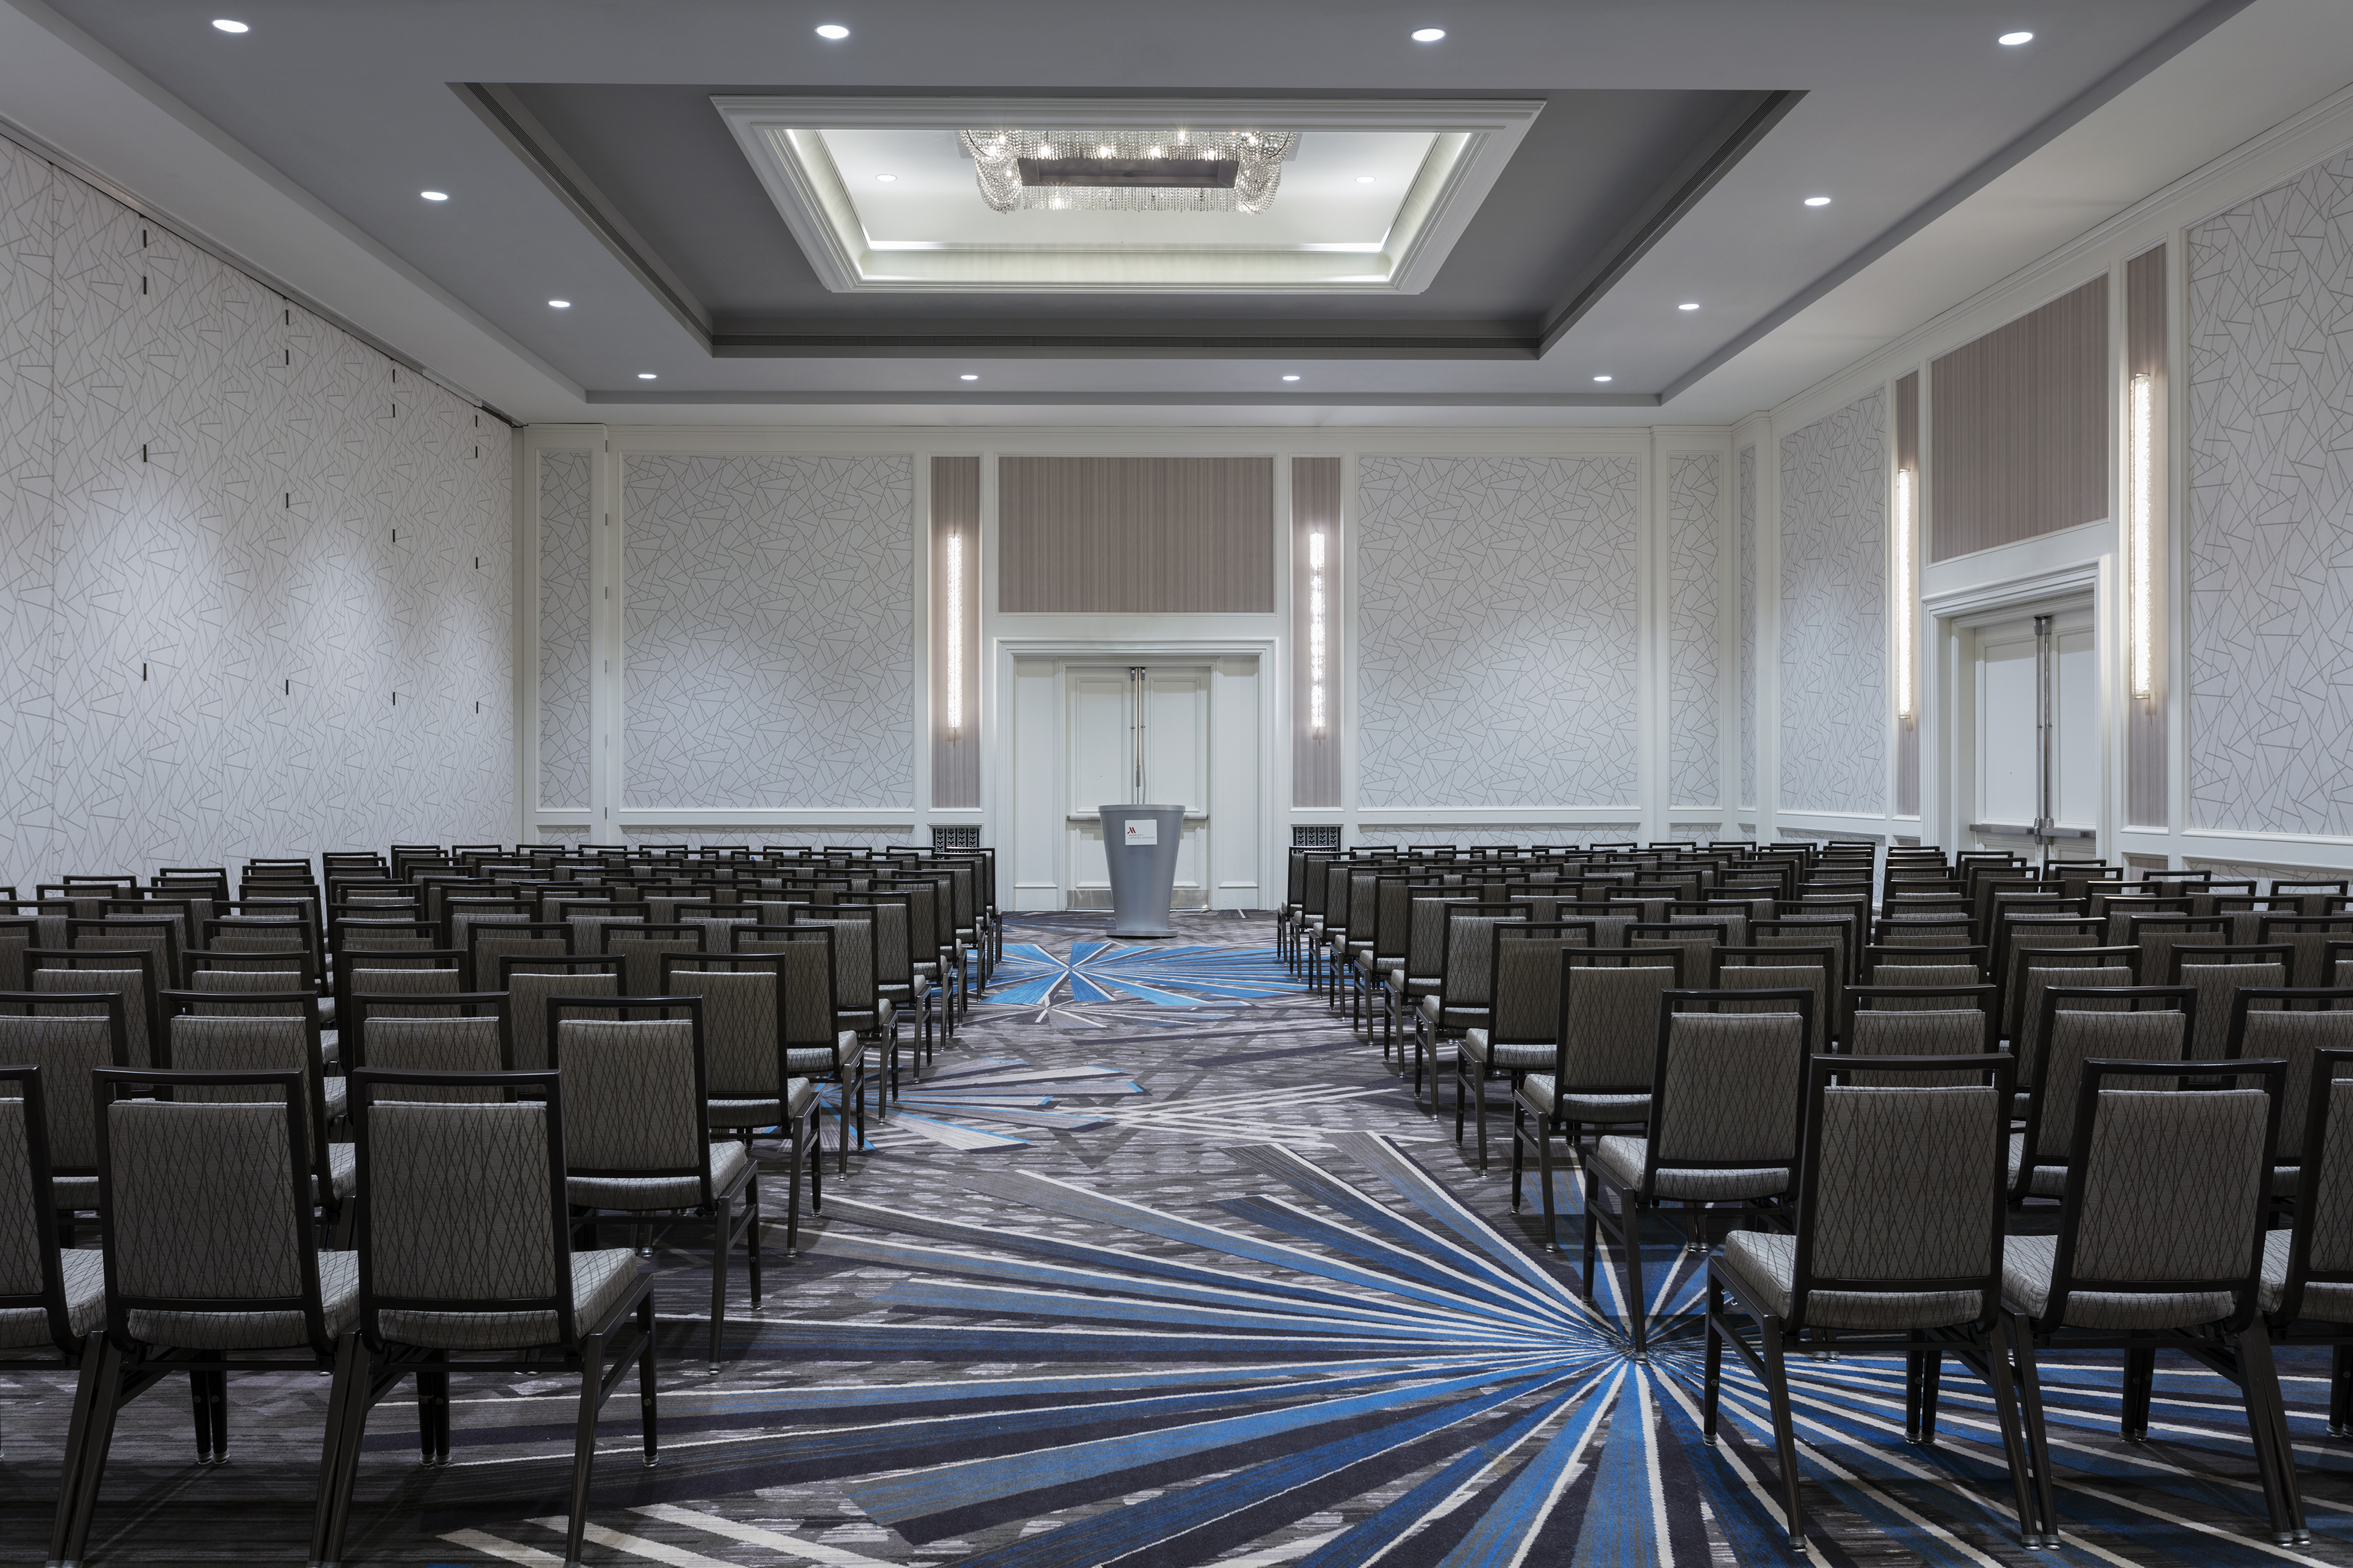 Ballroom set up with theater-style aisles of chairs facing podium